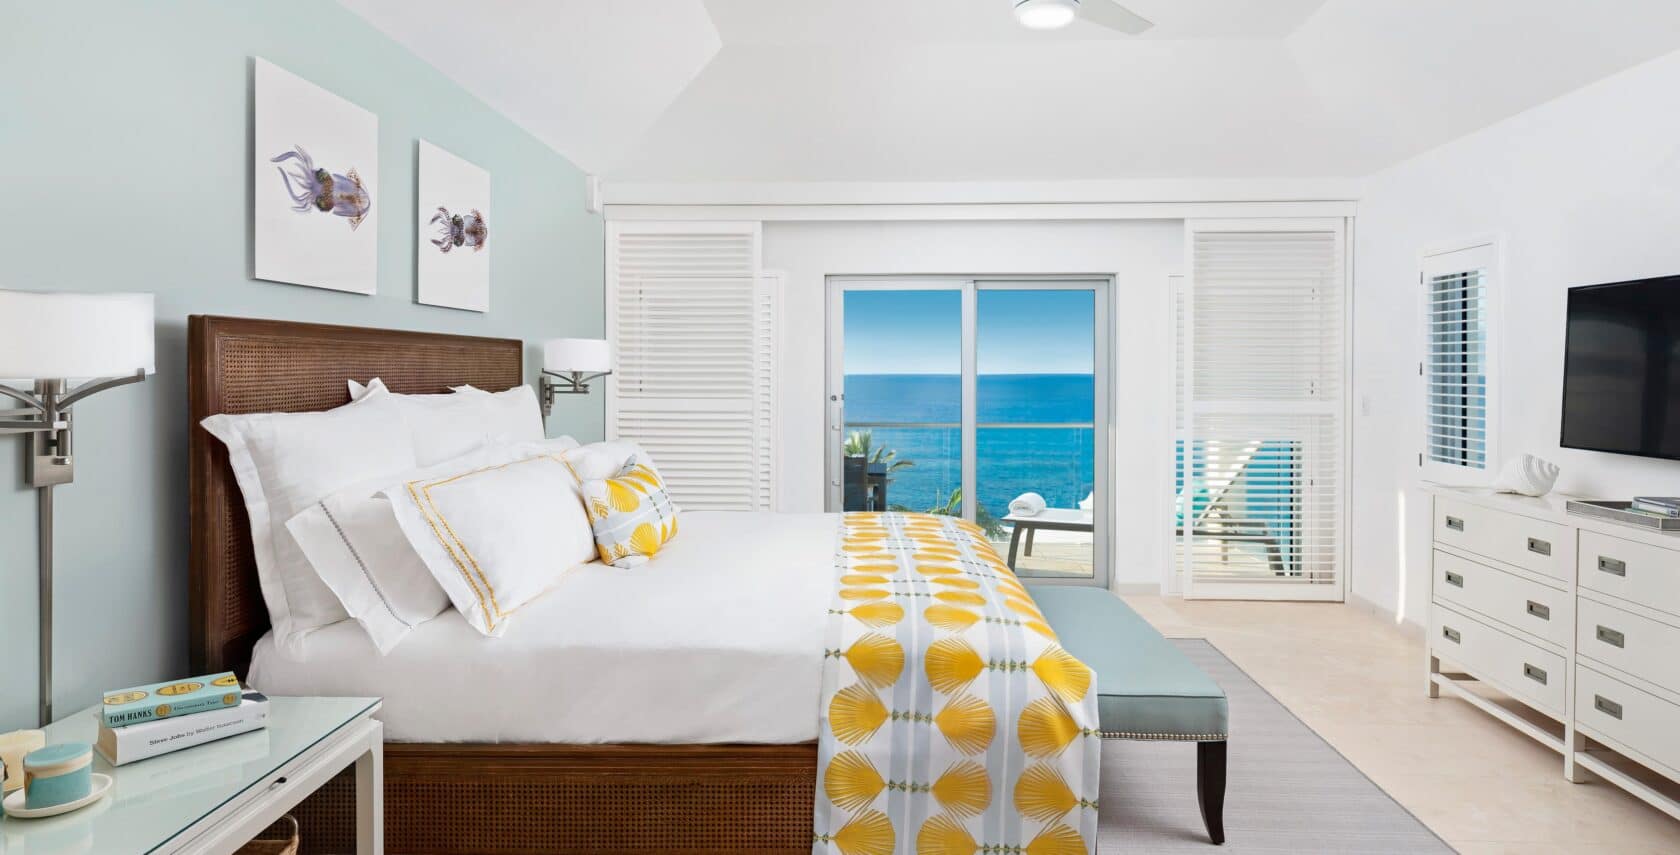 A bedroom with glass doors showing an ocean view.